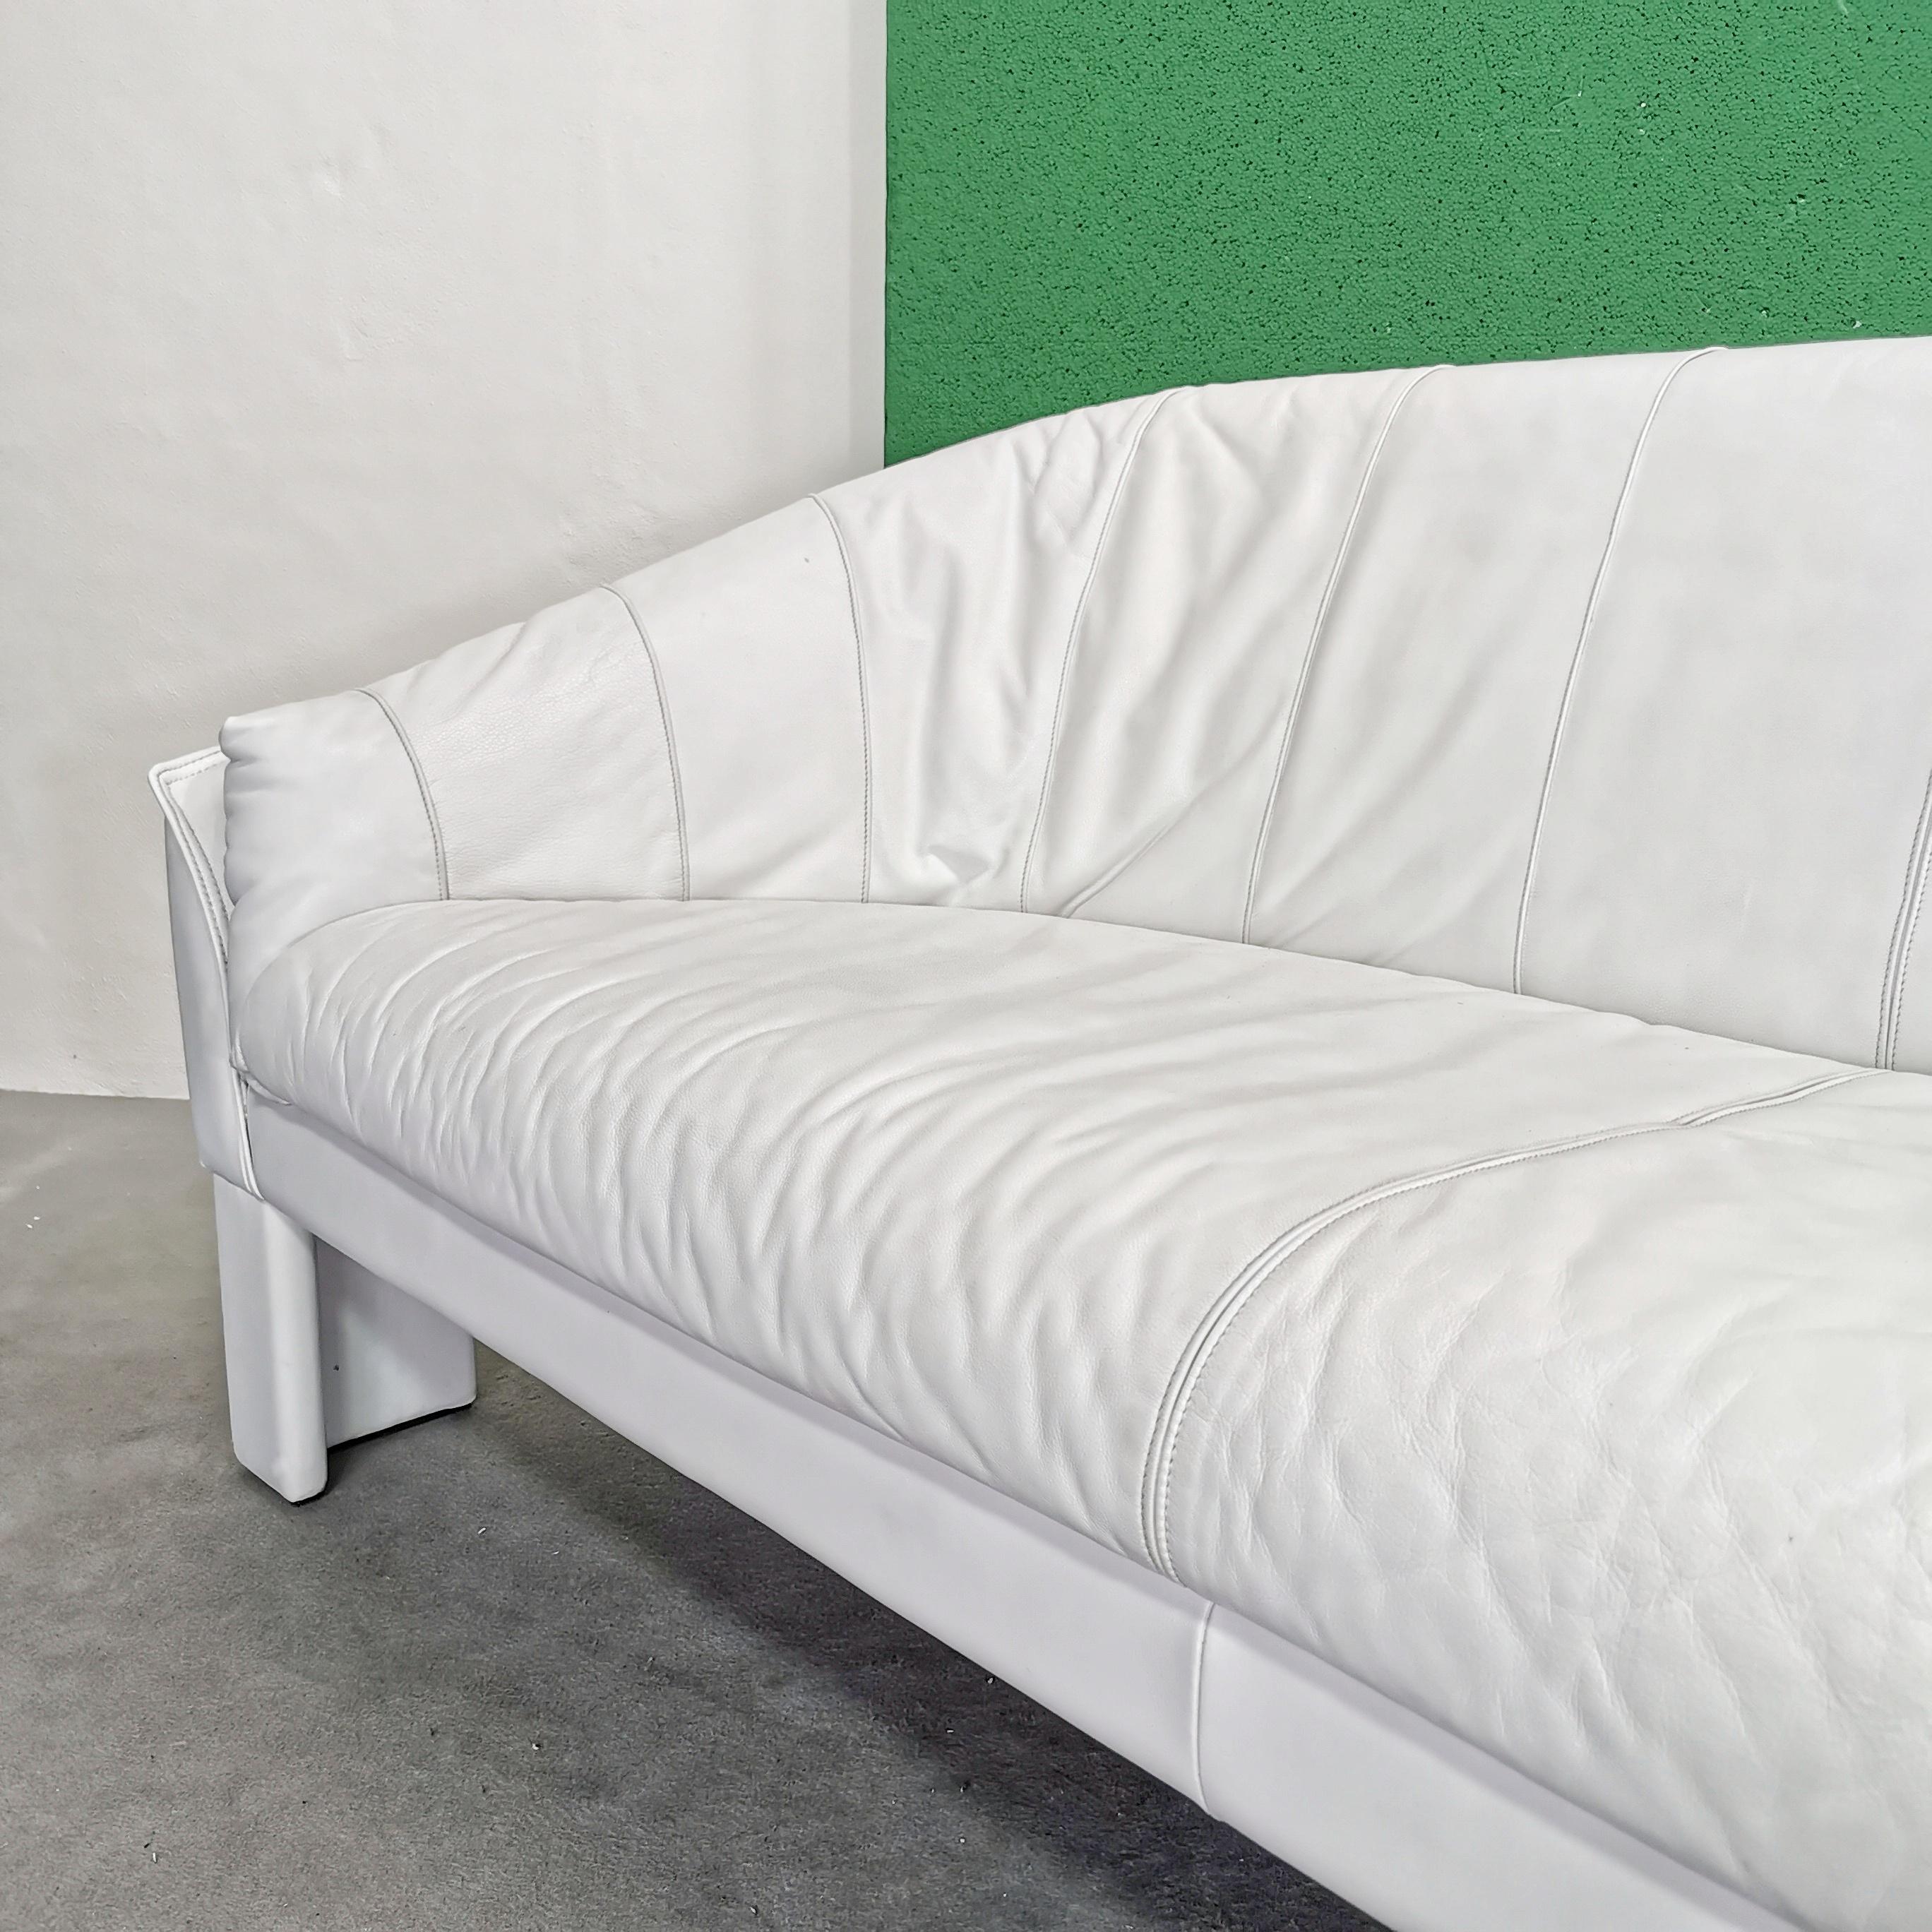 1980s white leather sofa manufactured by Marac For Sale 4